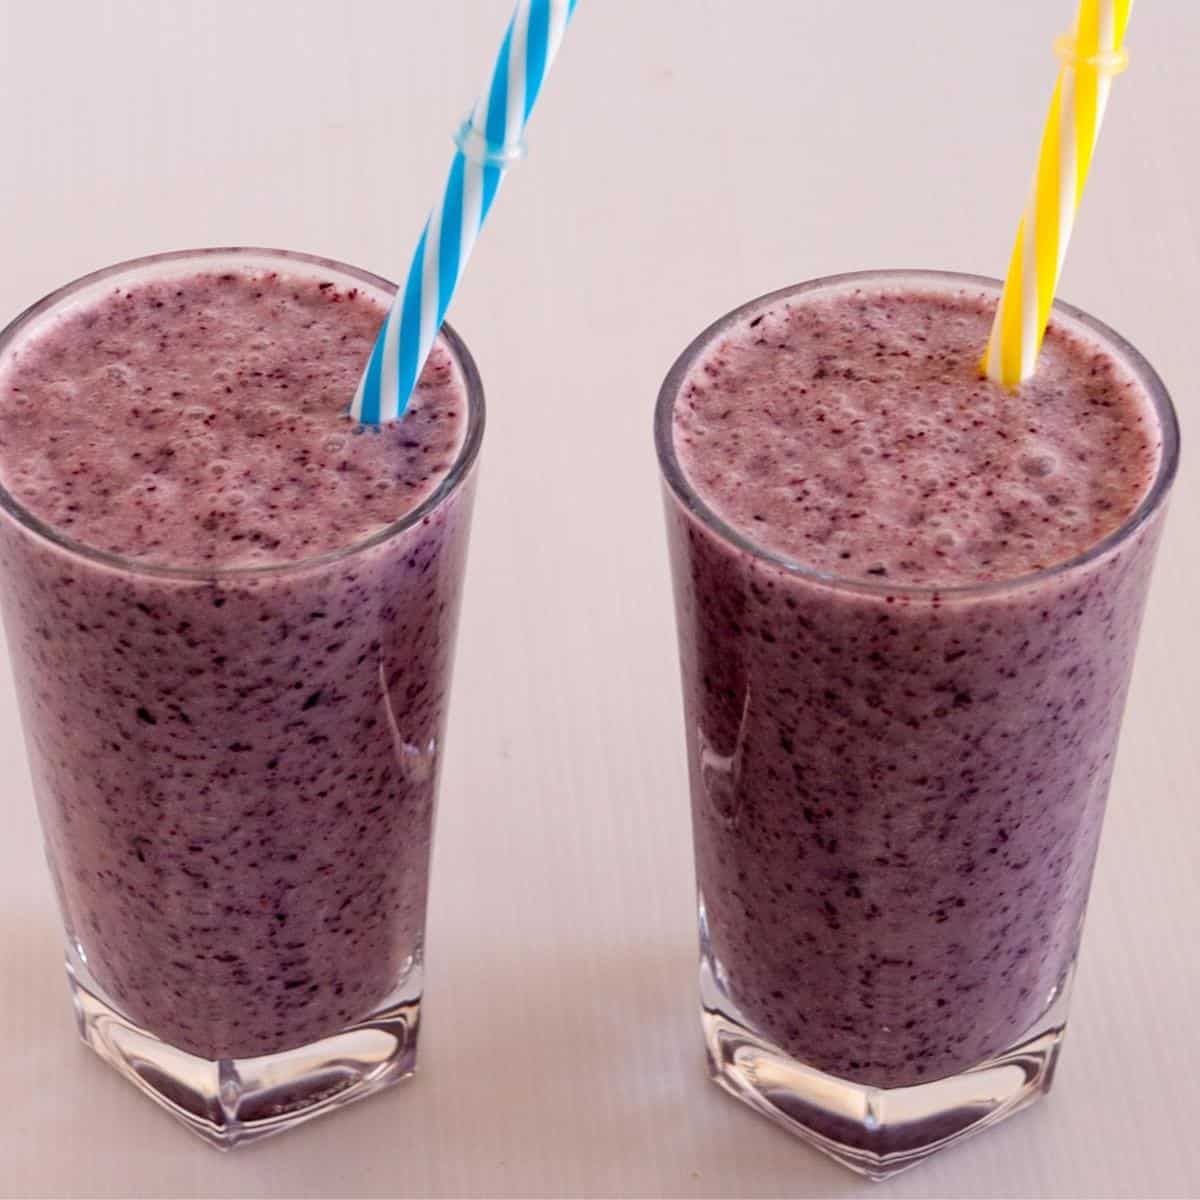 Two glasses of blueberry banana smoothie.